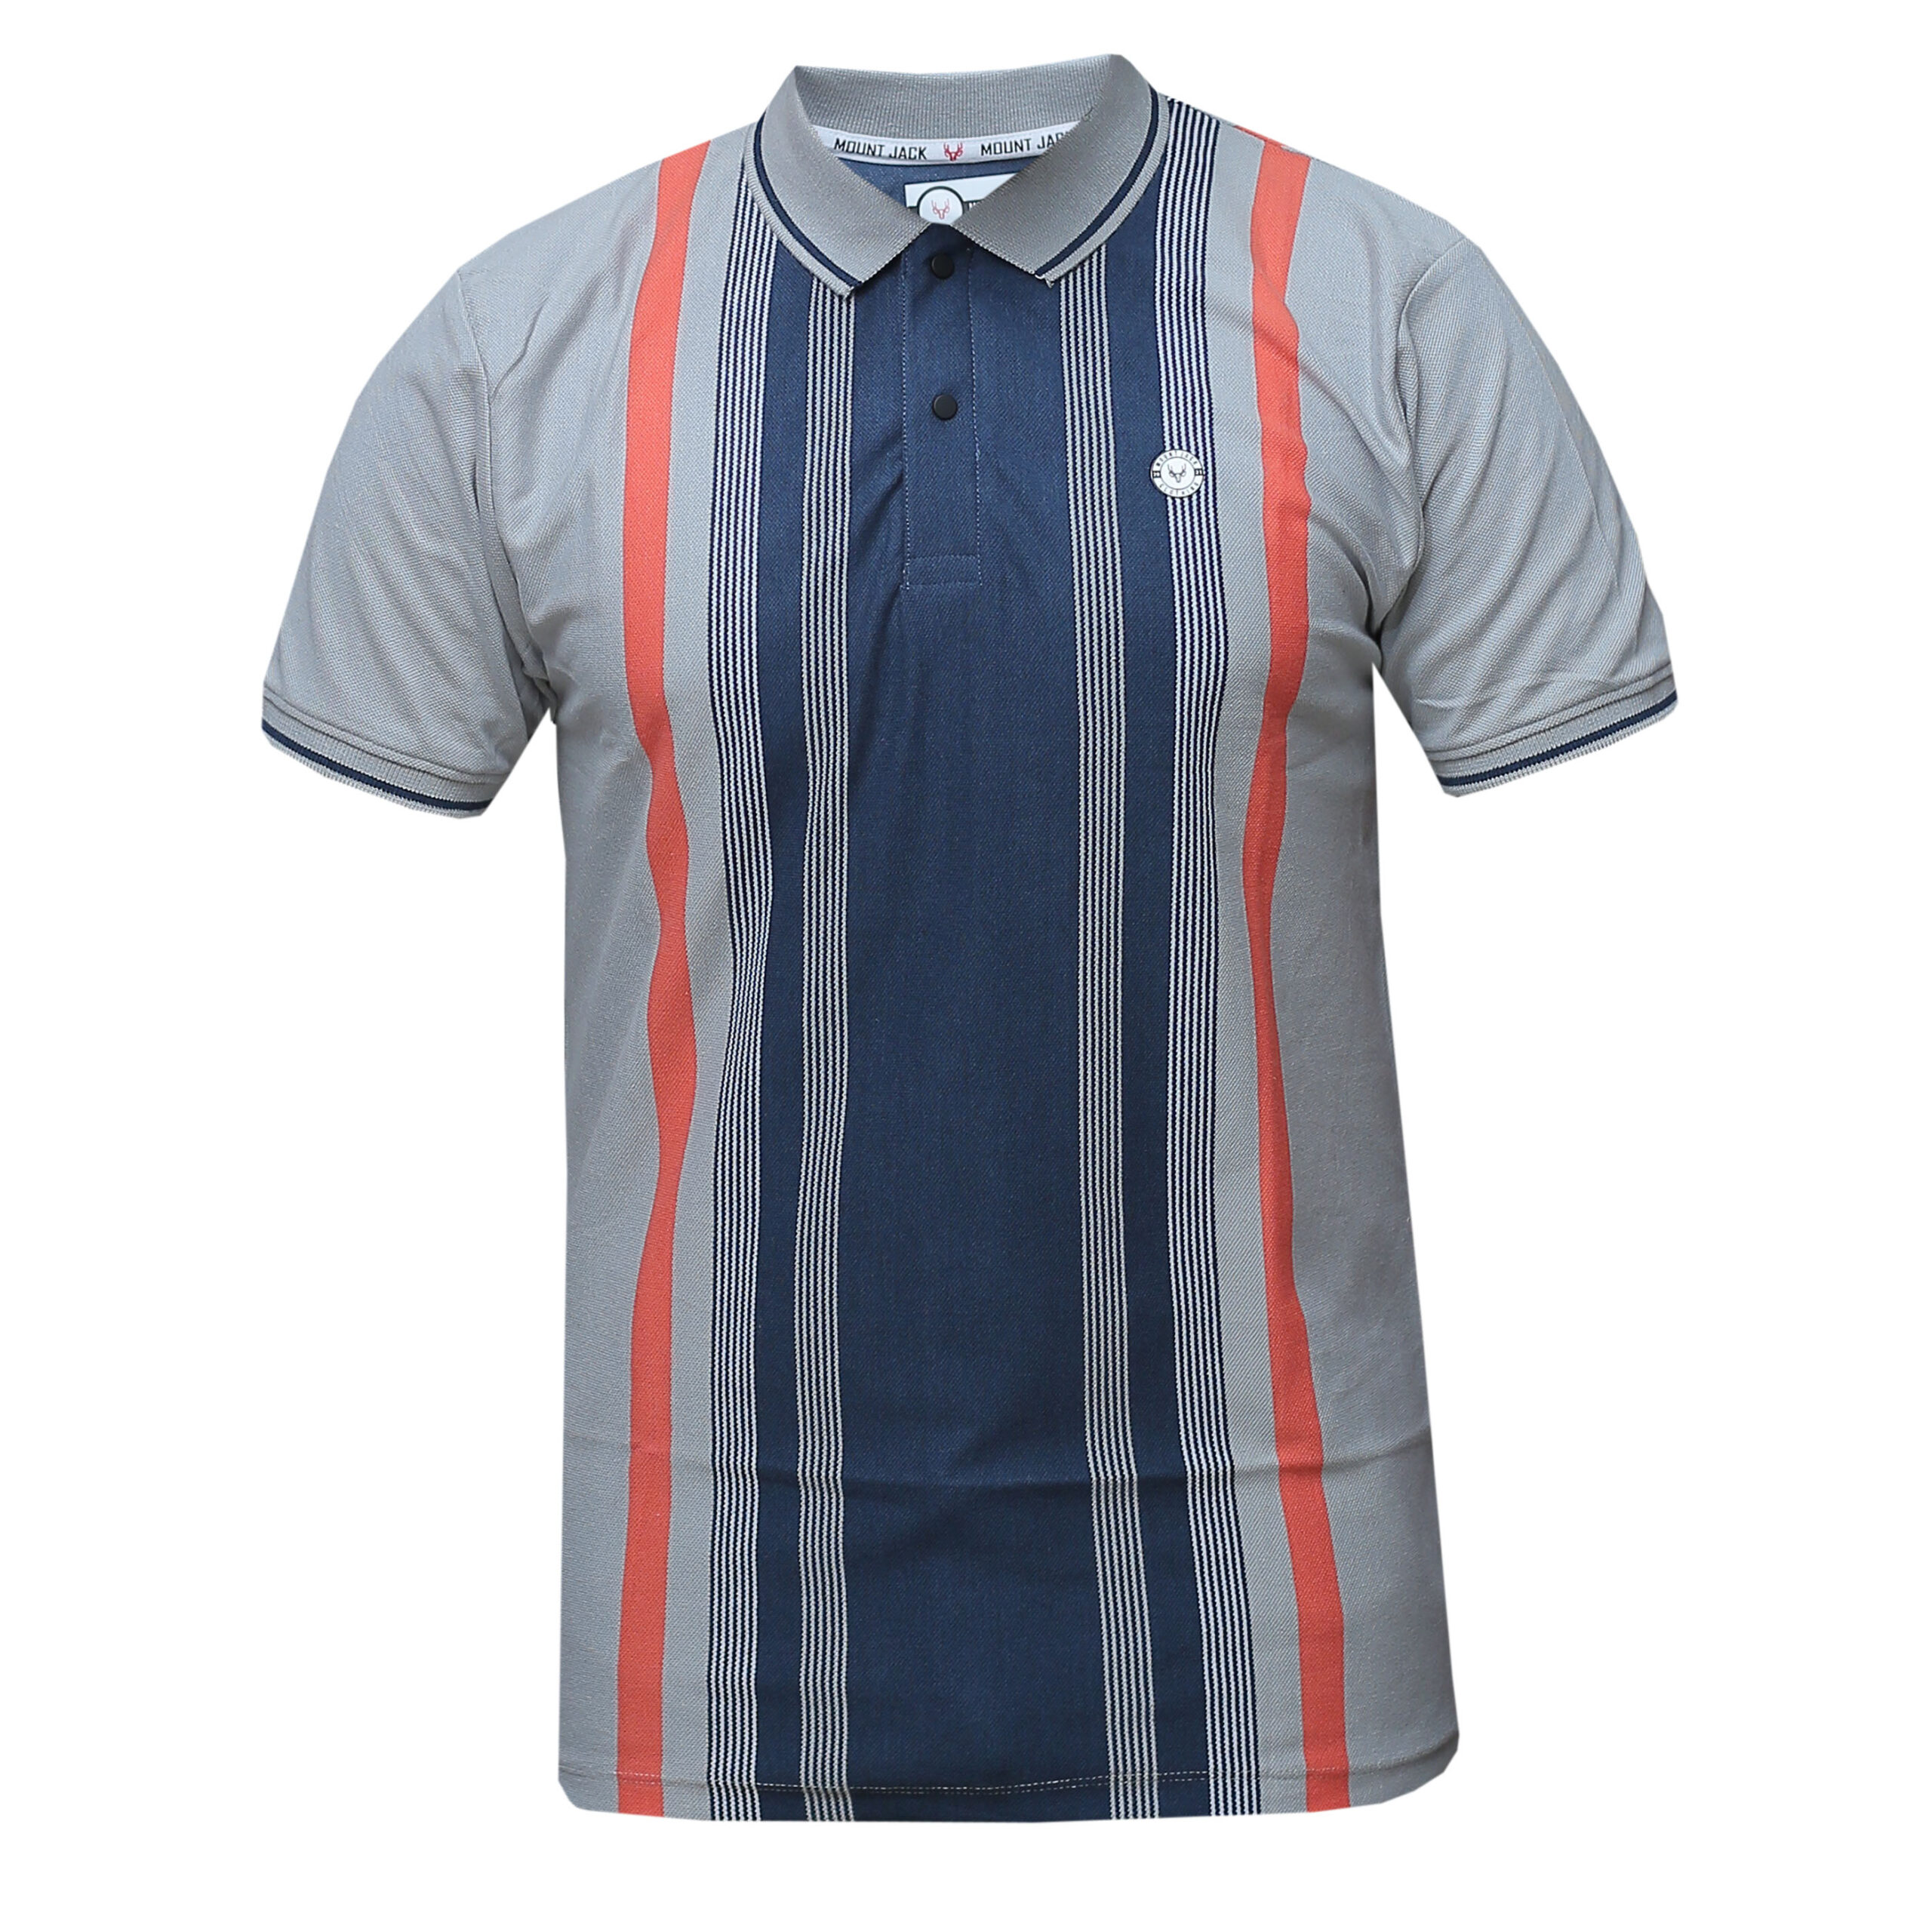 Mount Jack Quality Polo T-Shirts for Men